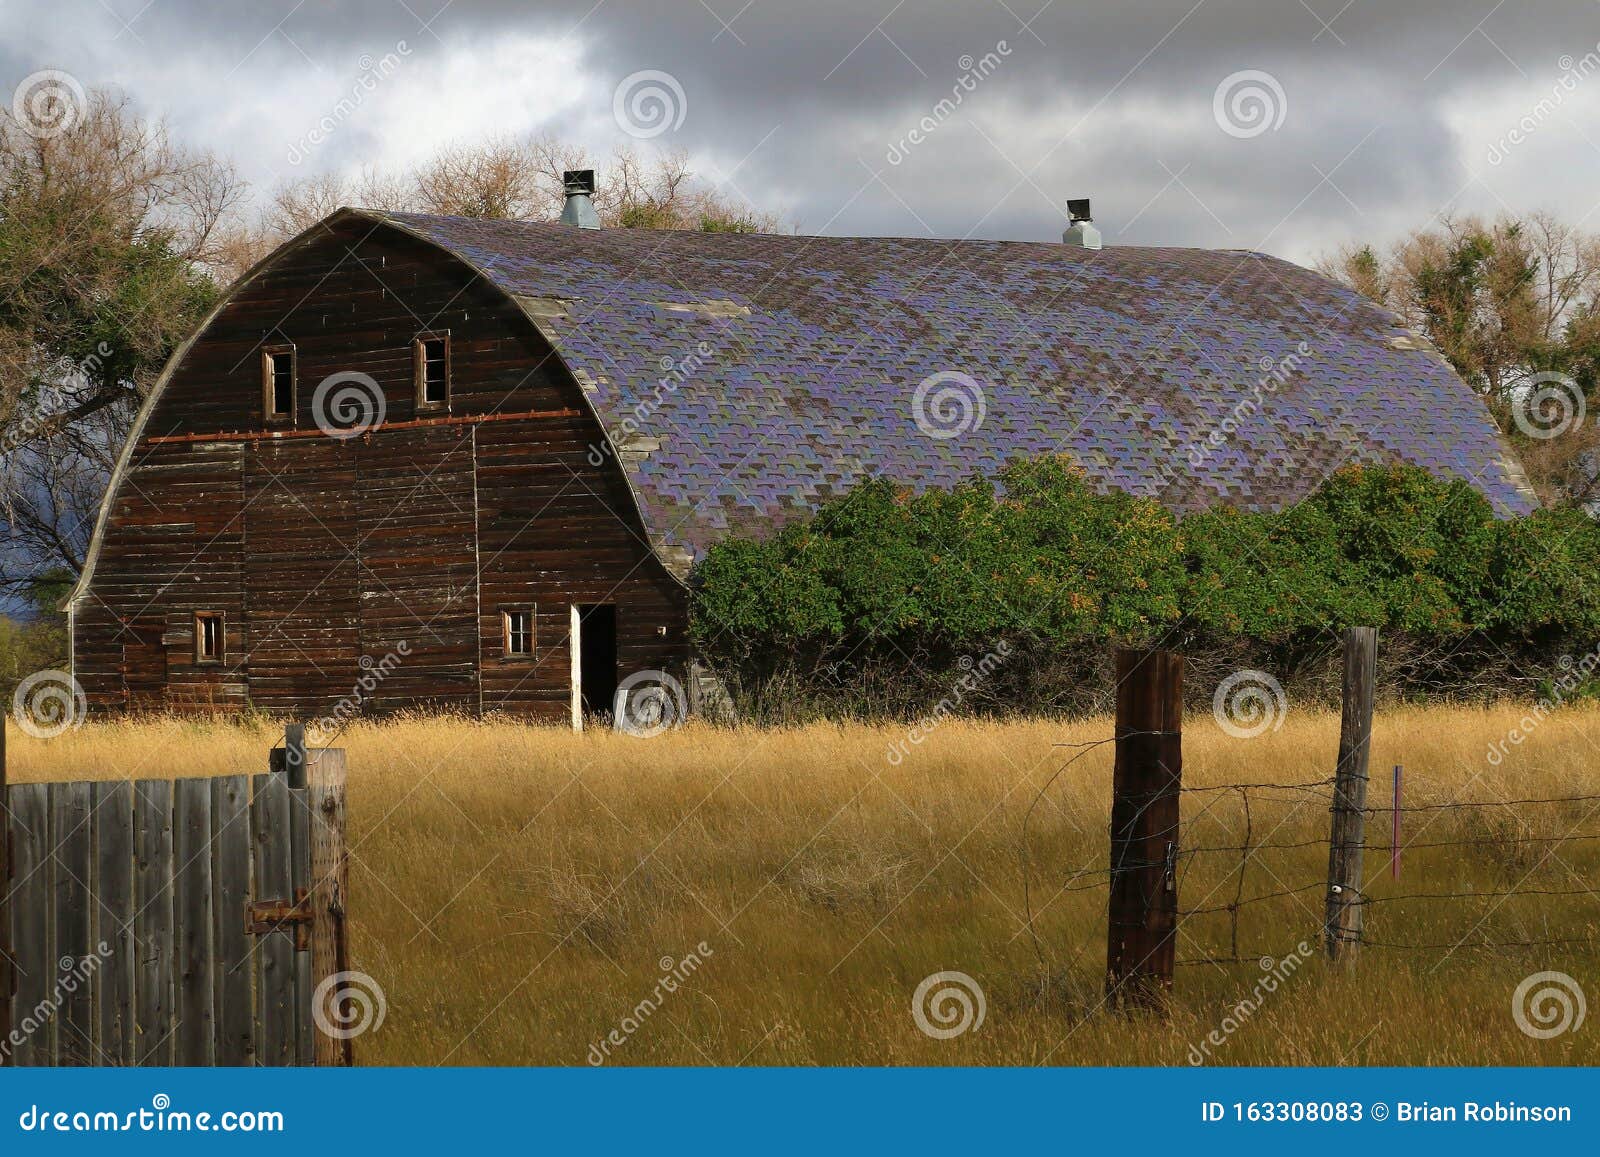 Old Weathered Half Dome Barn Stock Image Image Of Fence